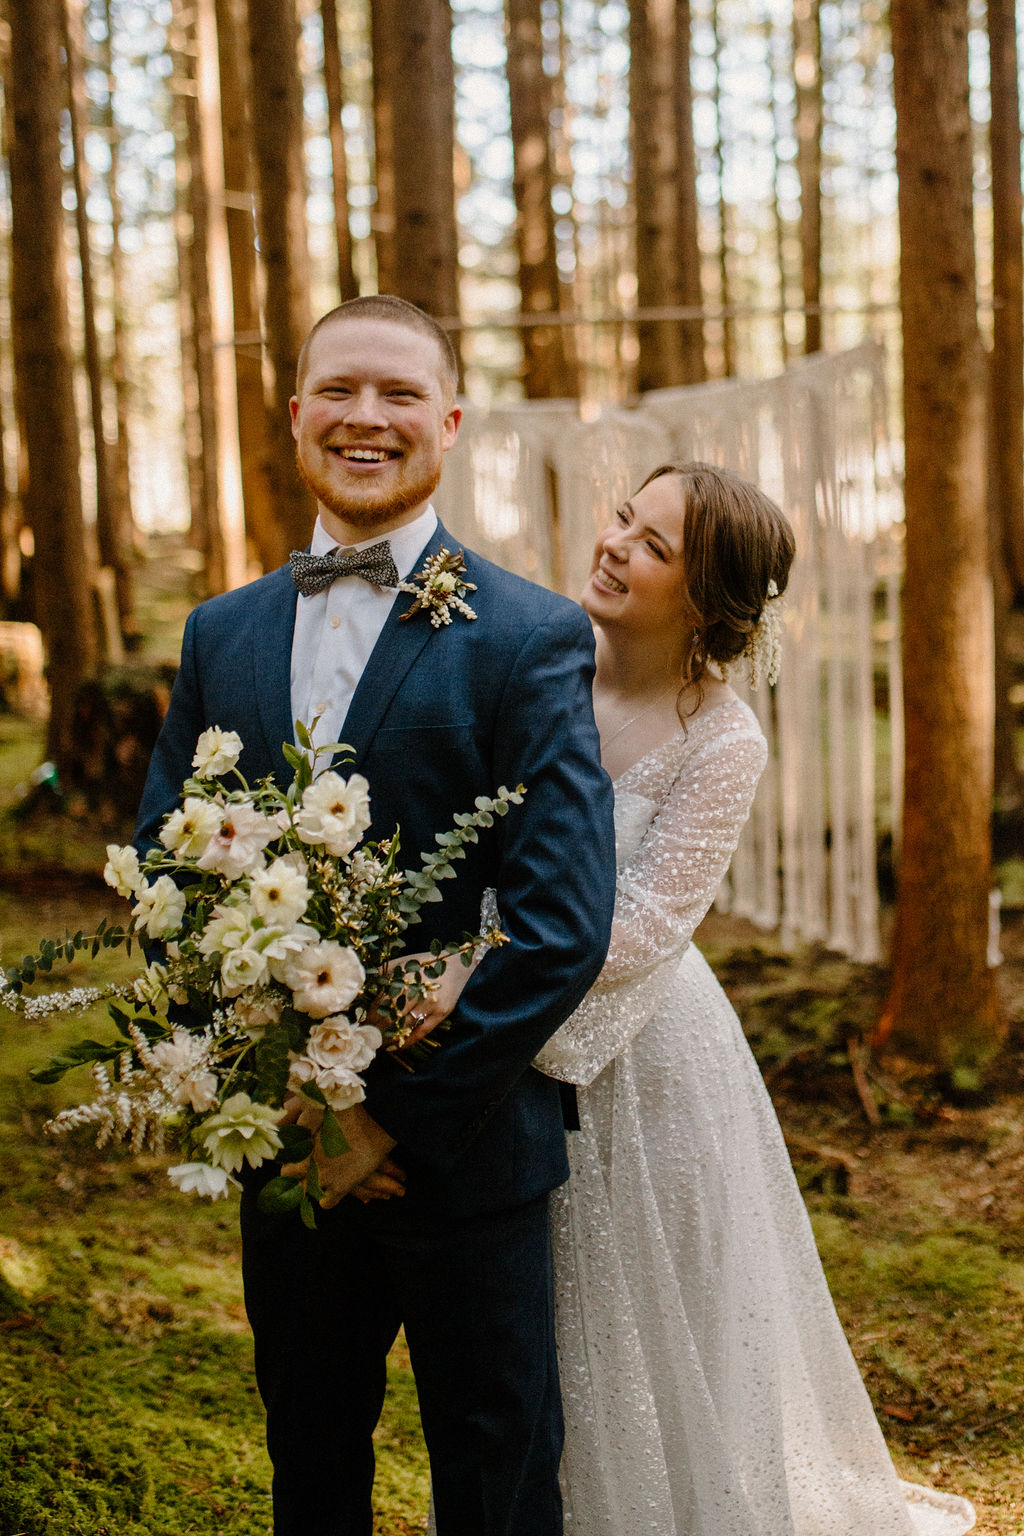 Beautiful Bride and Groom having a Washington elopement at the Emerald forest